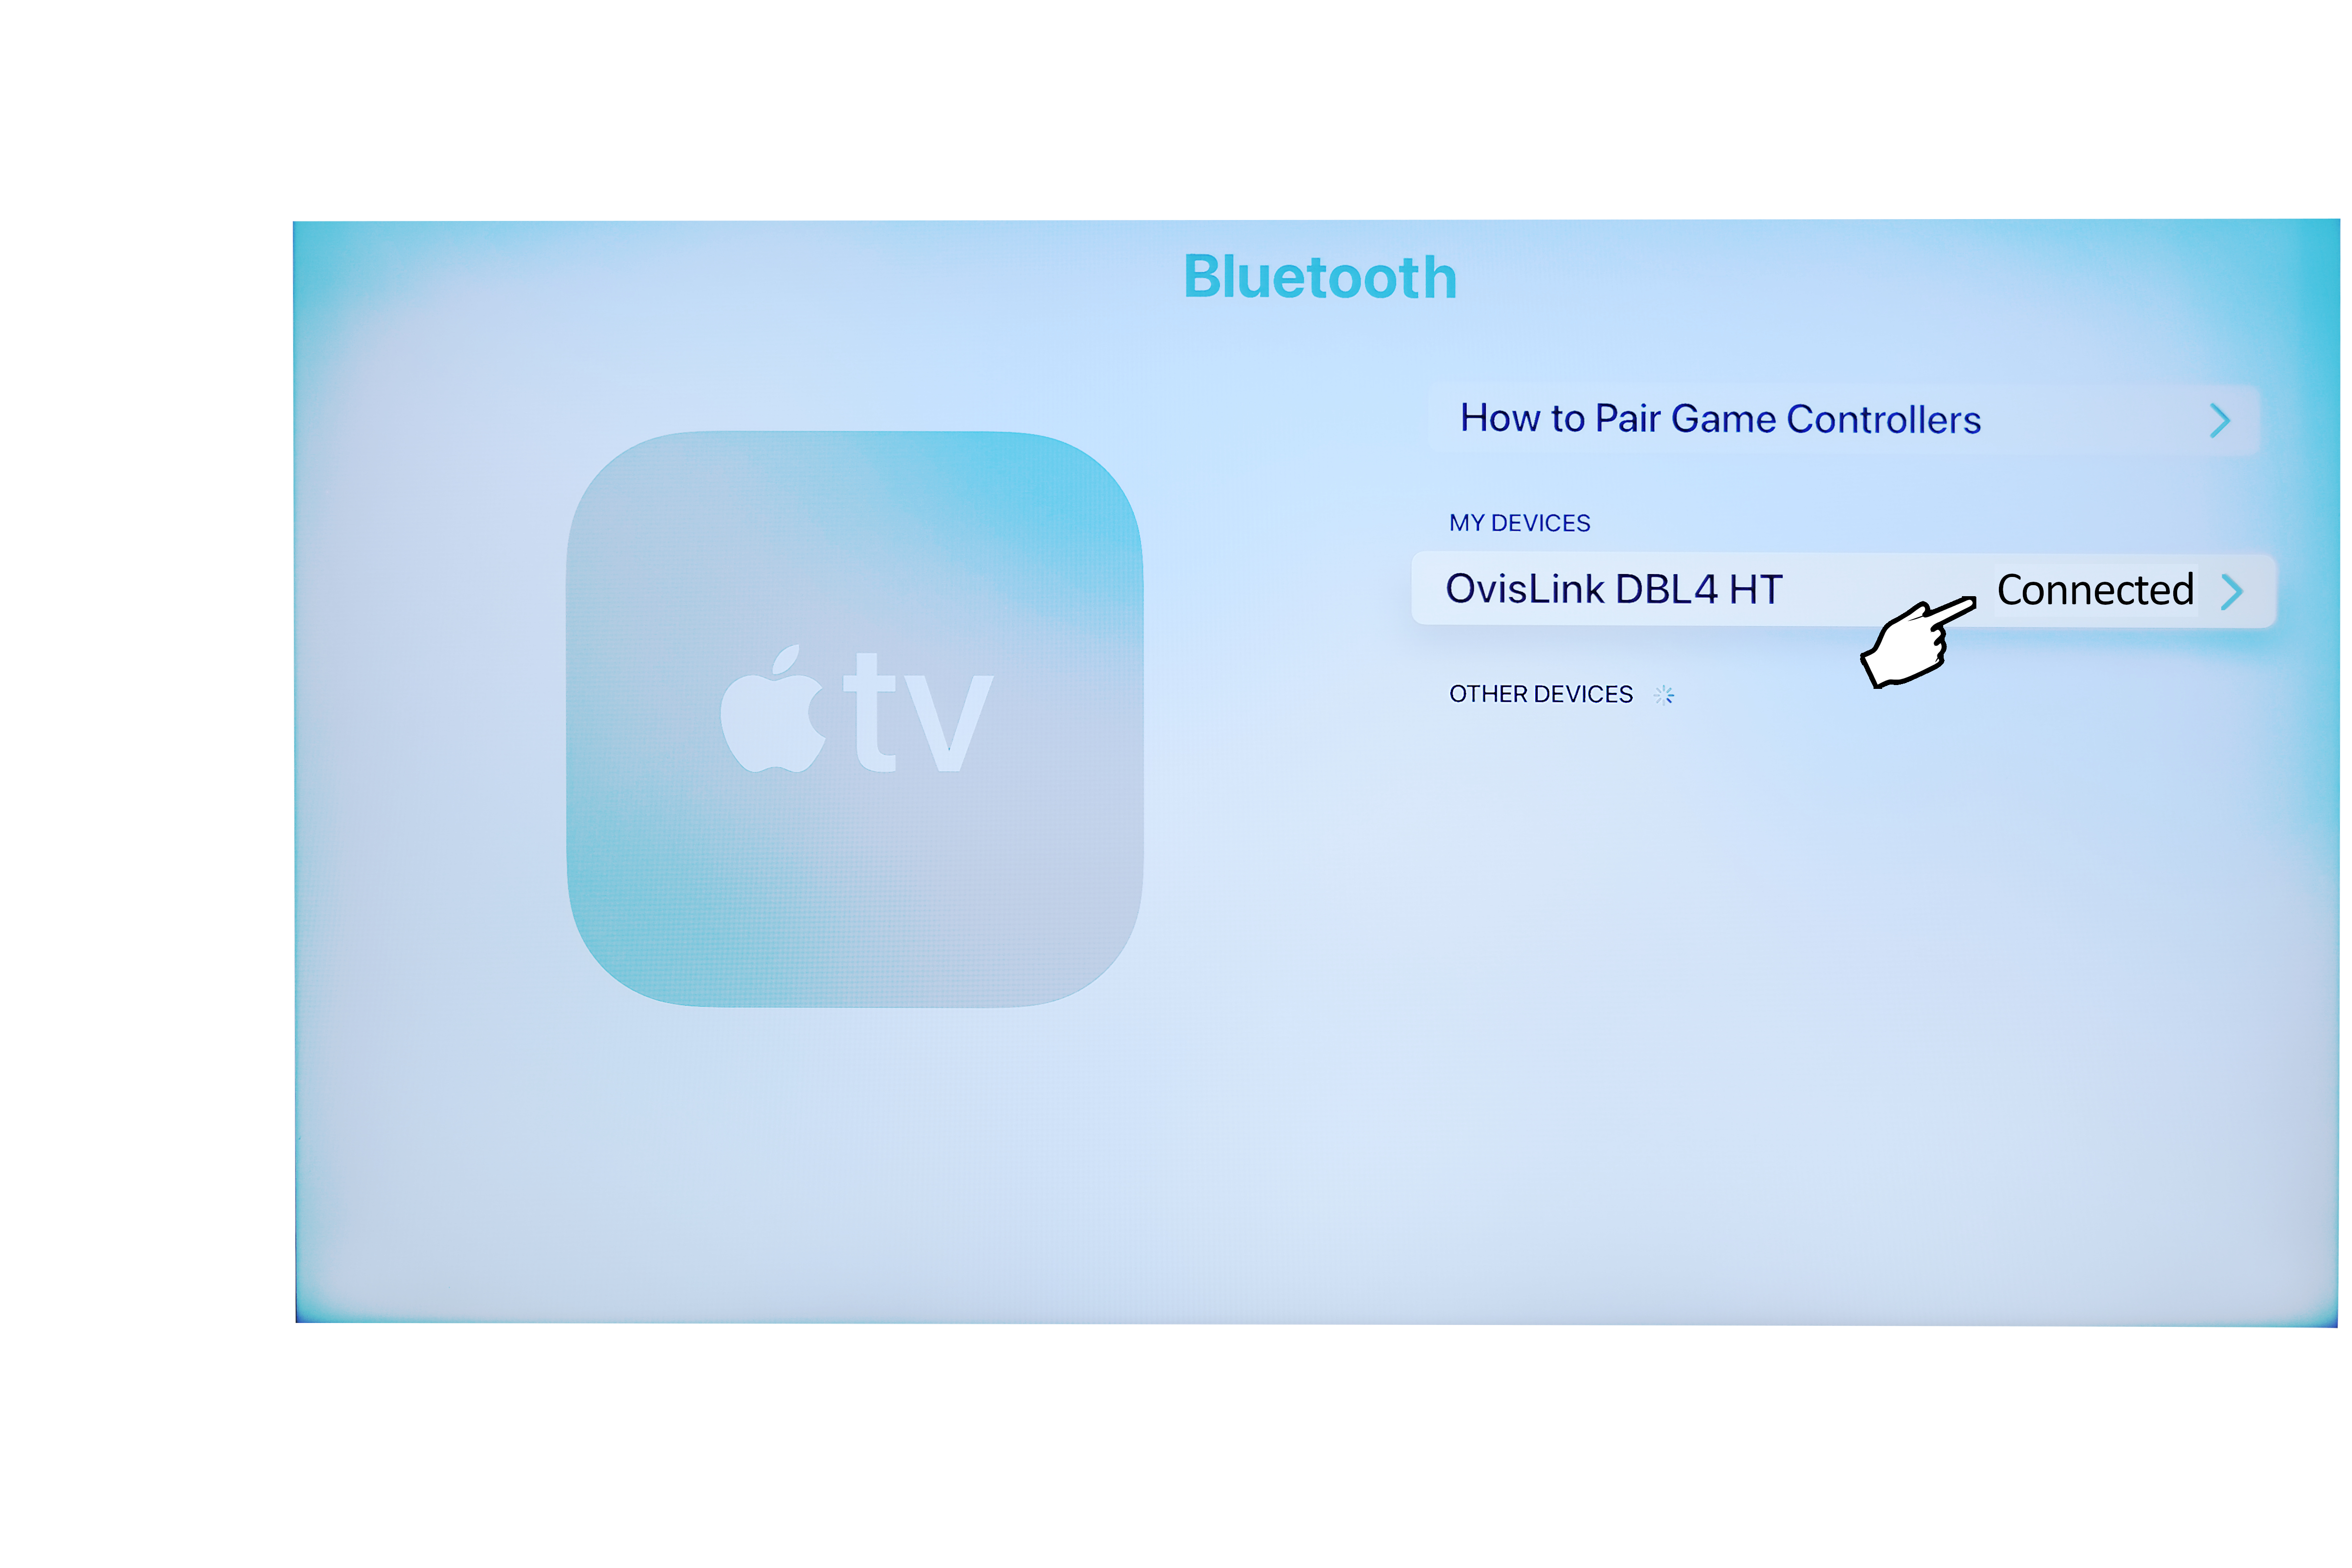 OvisLink Bluetooth headset connected to Apple TV